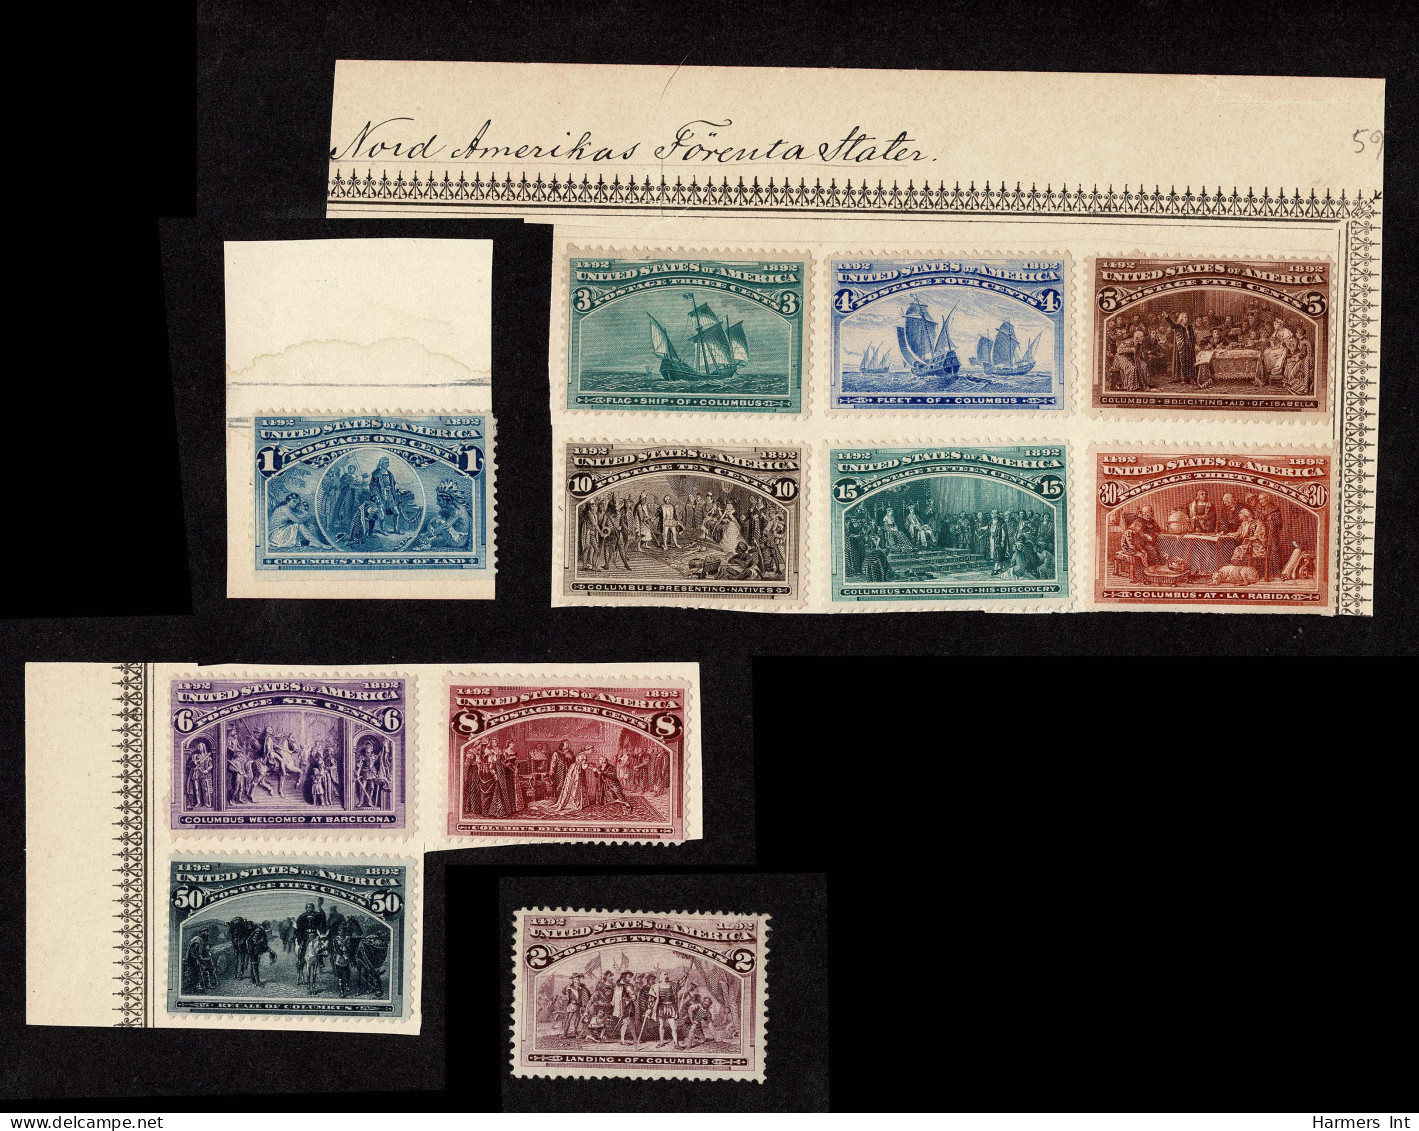 Lot # 048 1893 Columbian Exposition, 1¢ To 50¢ - Unused Stamps